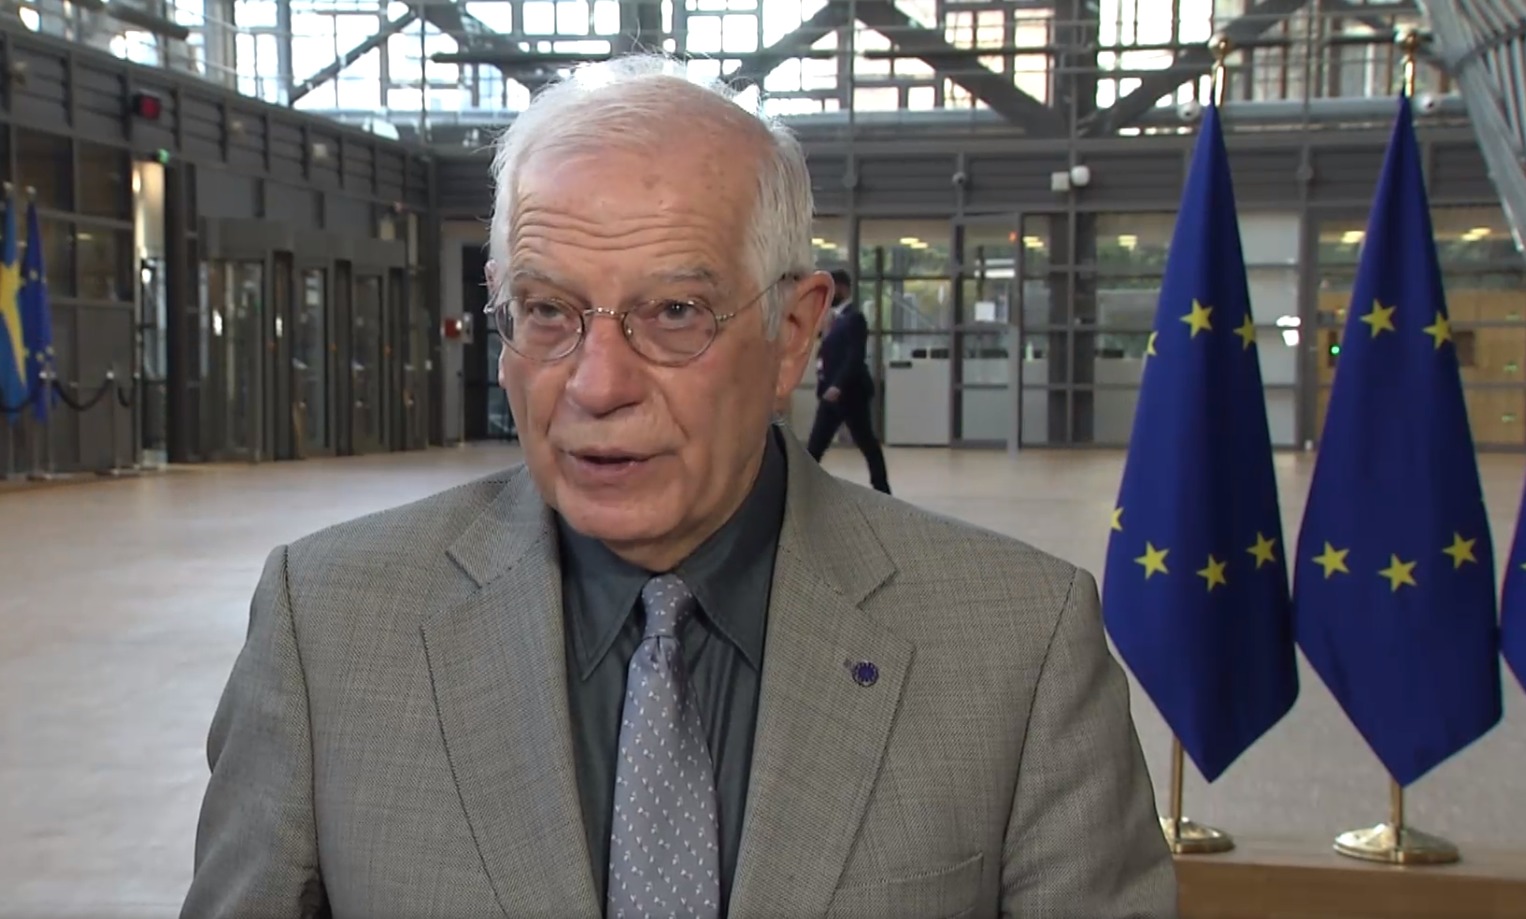 EU-Armenia Agreement aims to bring positive change to people’s lives – Josep Borrell - The US Armenians